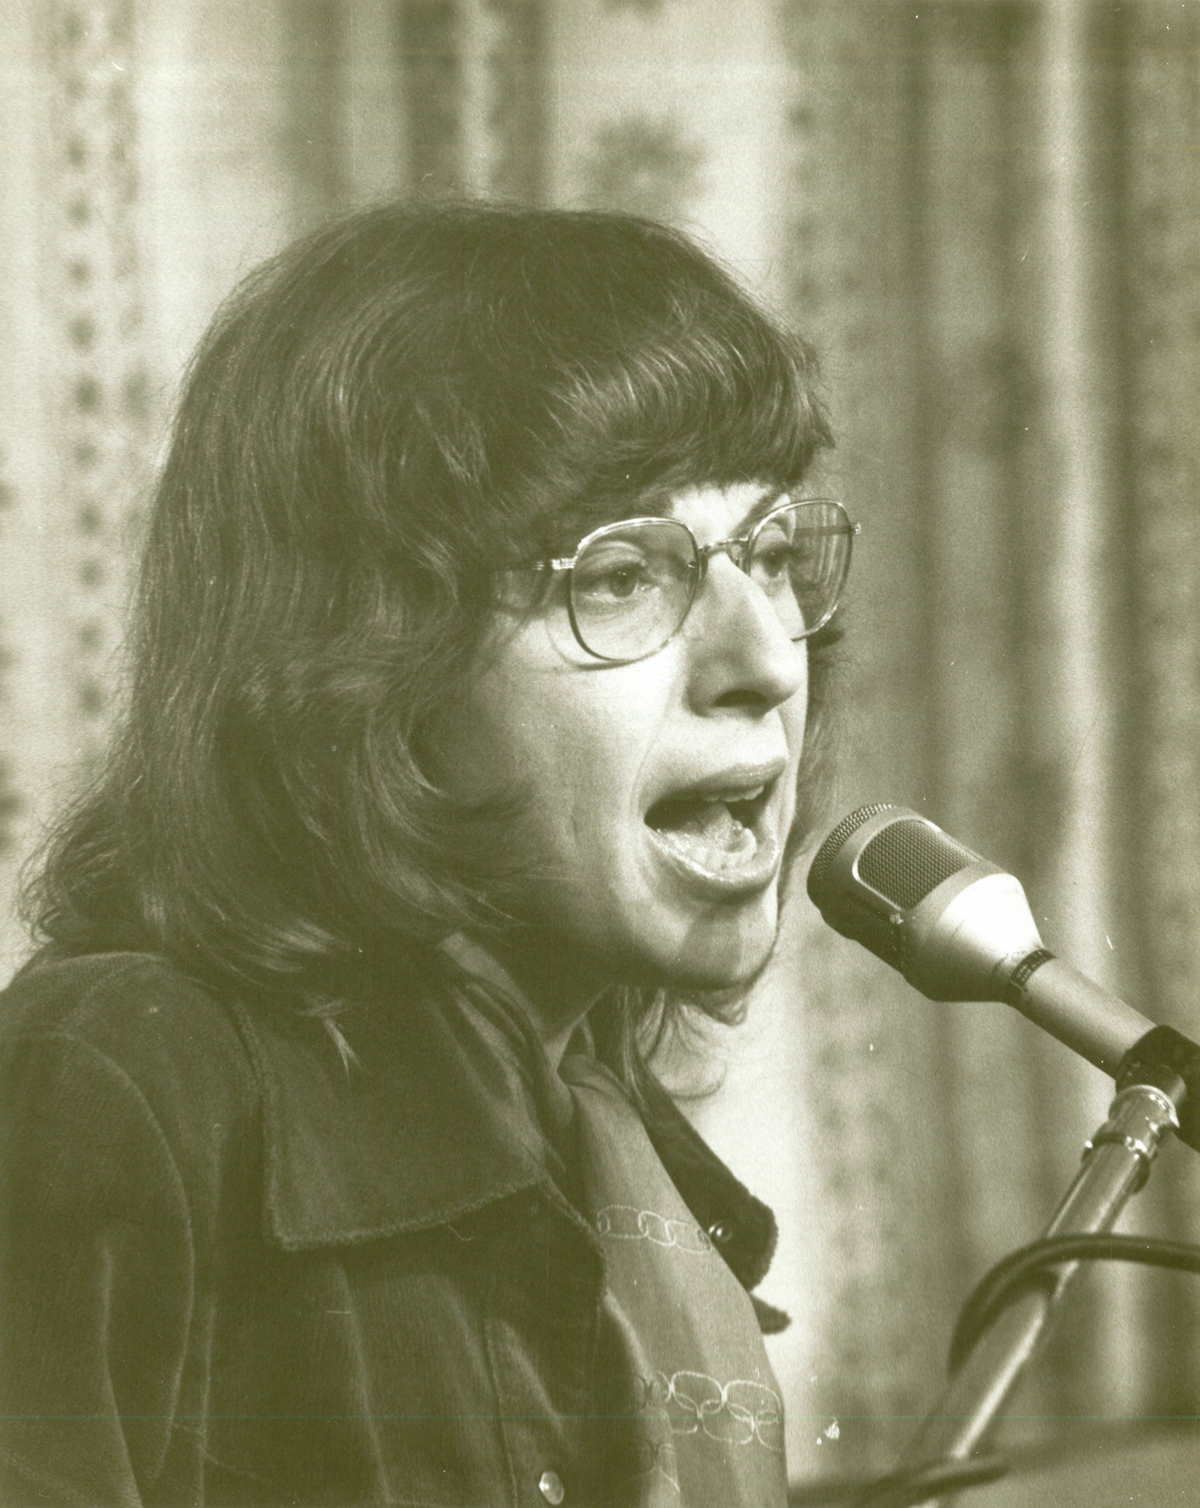 Sepia toned image of white woman in glasses singing into mic